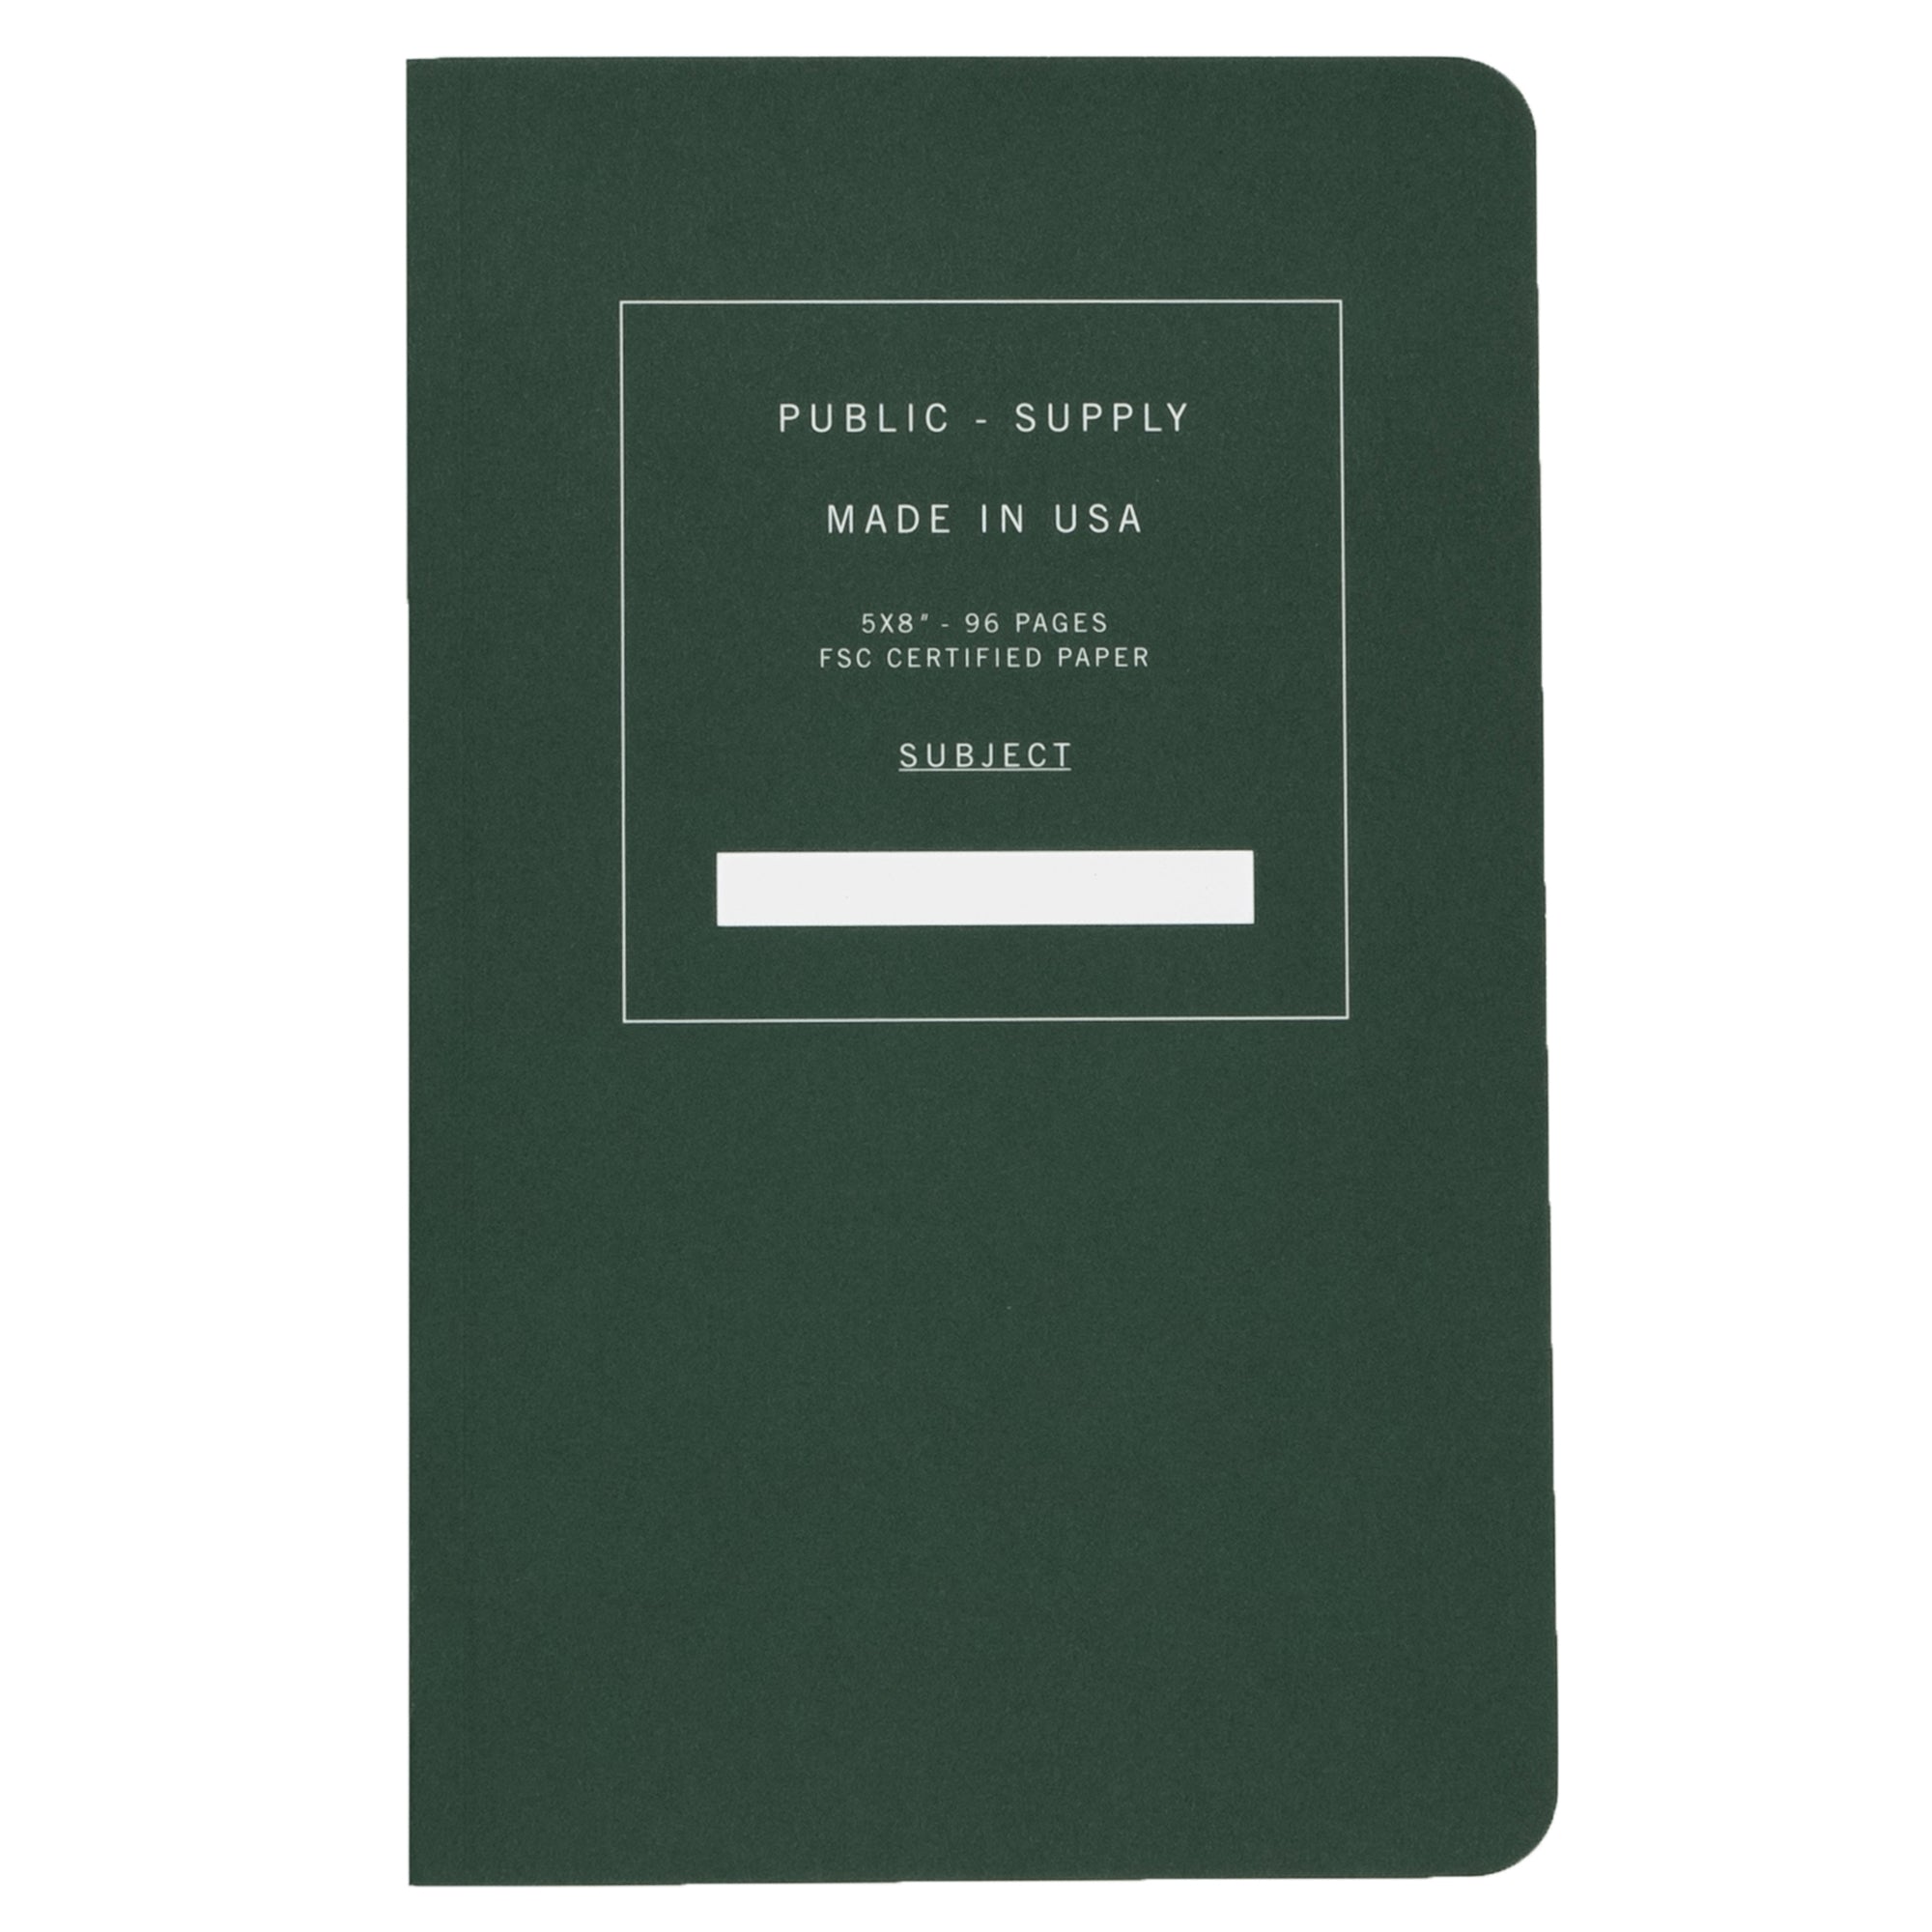 5x8" - Notebook - Soft Cover - Green